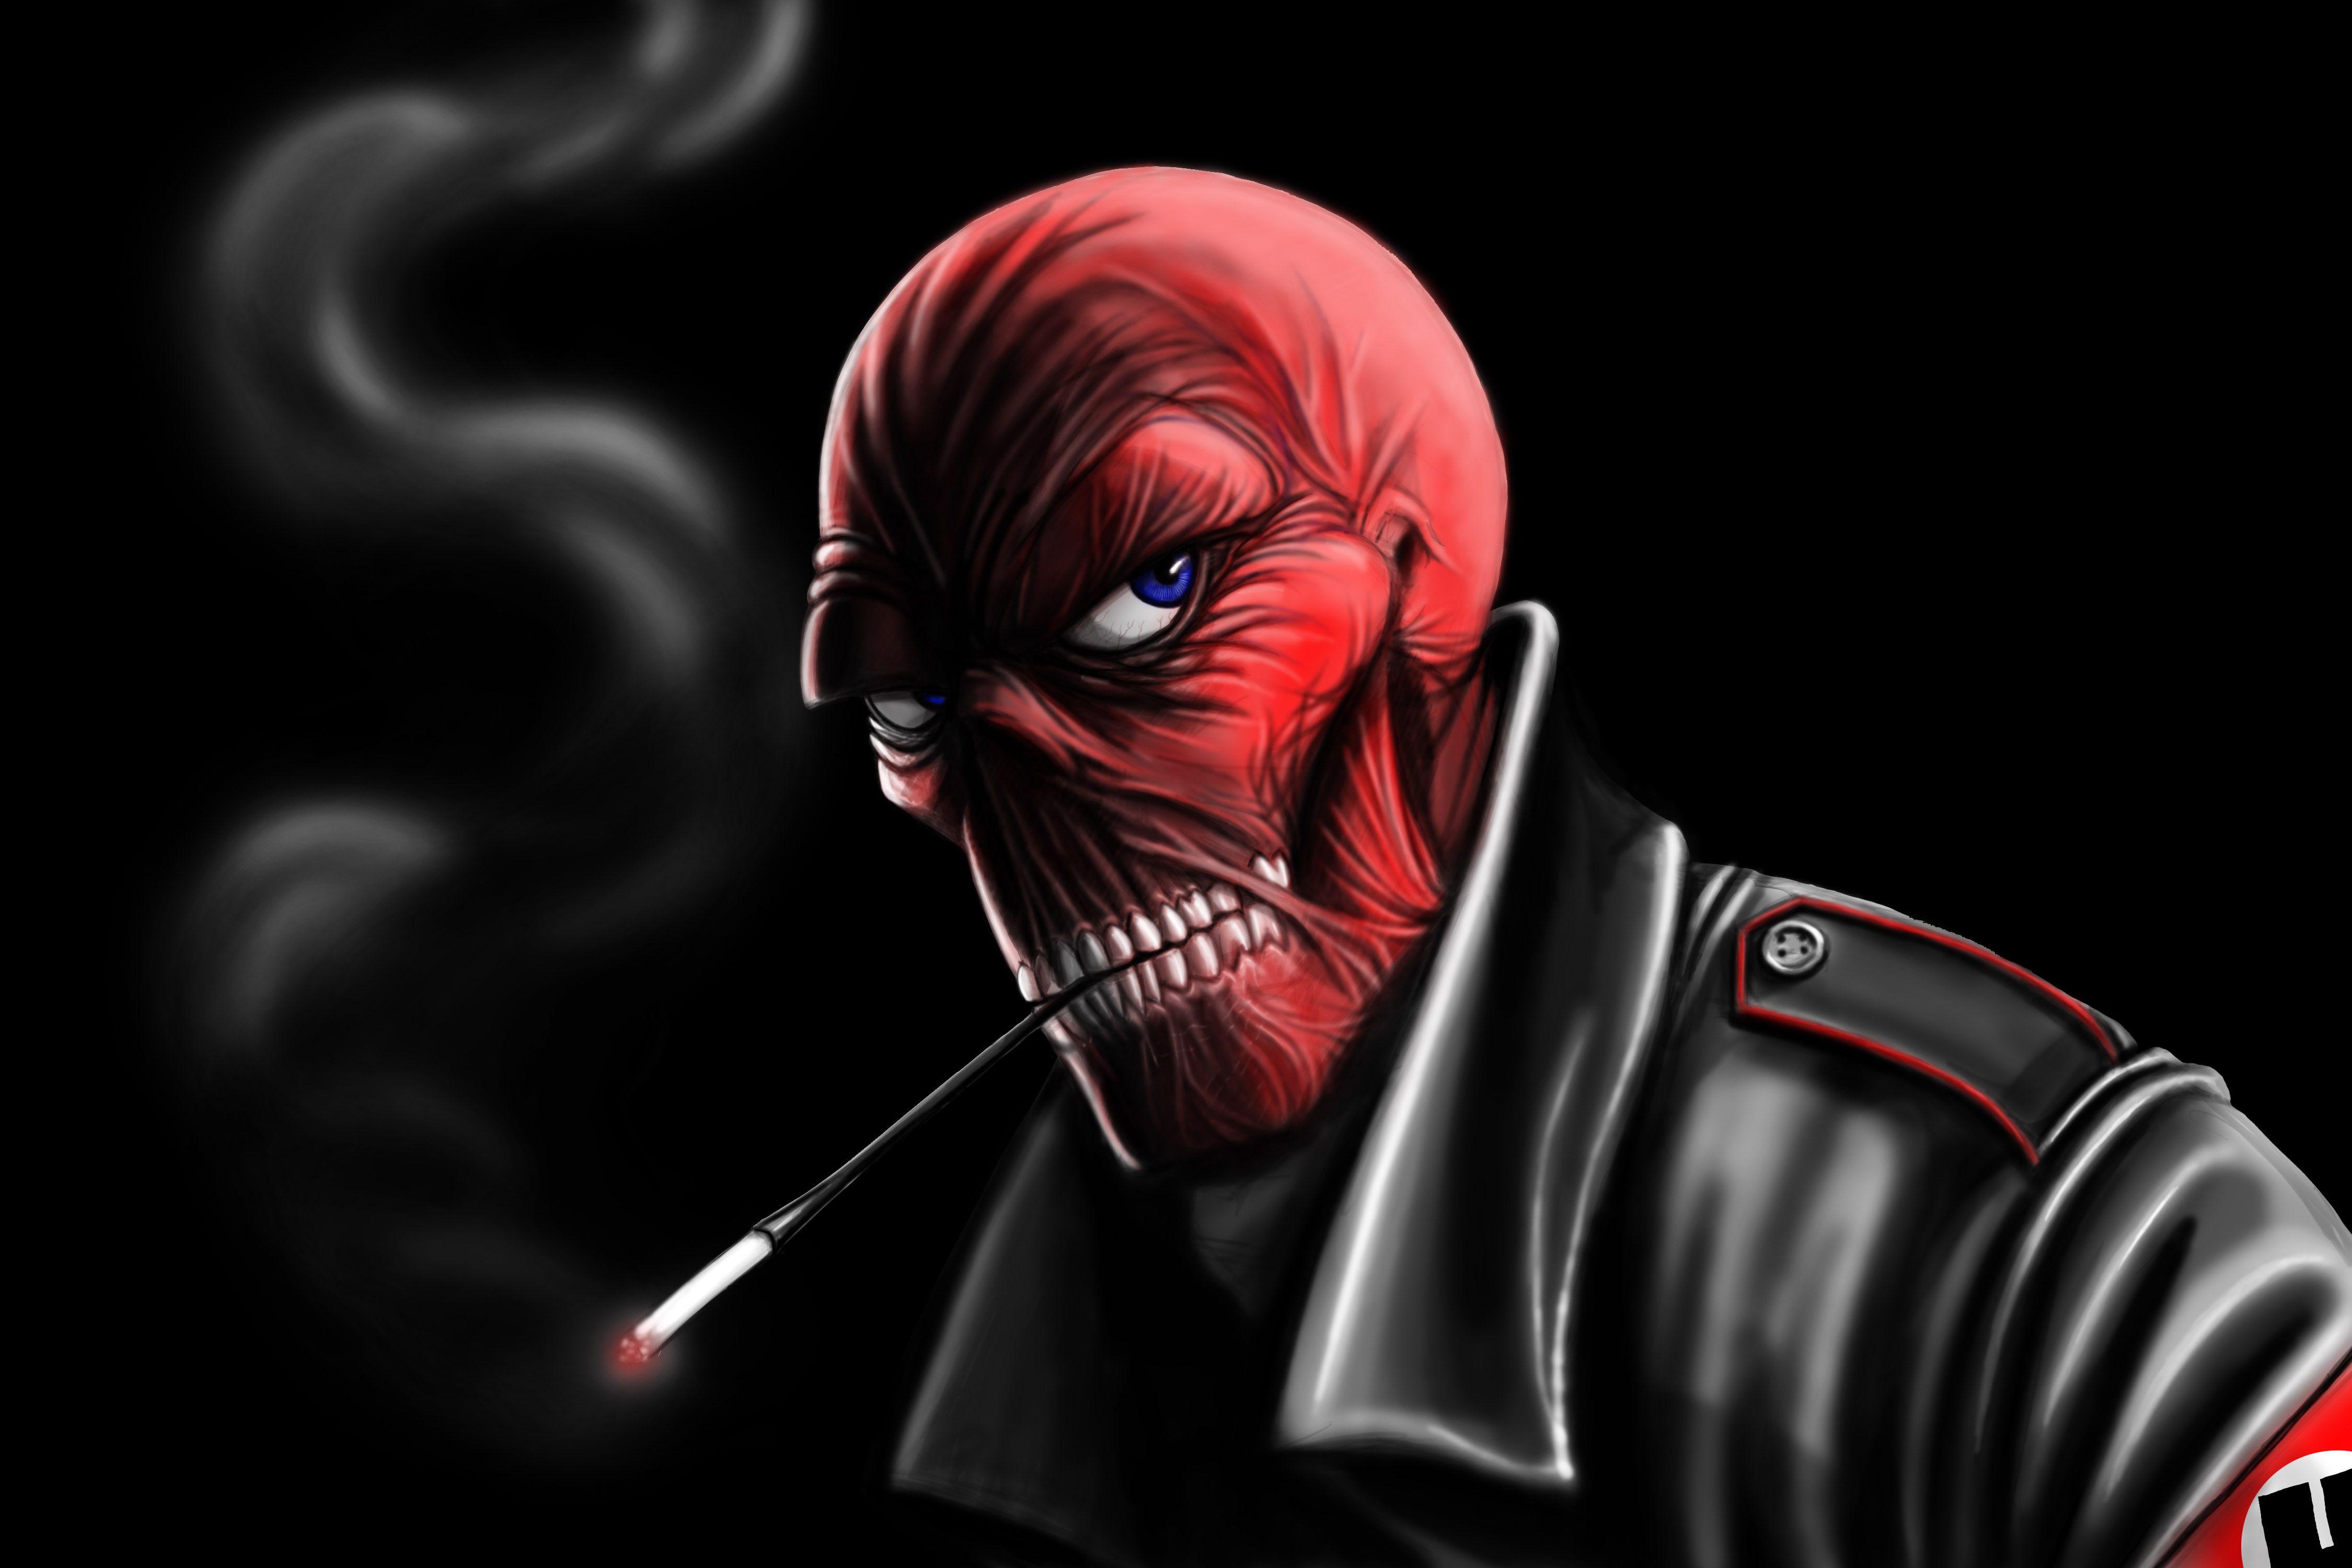 Red Skull 4k Ultra HD Wallpapers and Backgrounds Image.